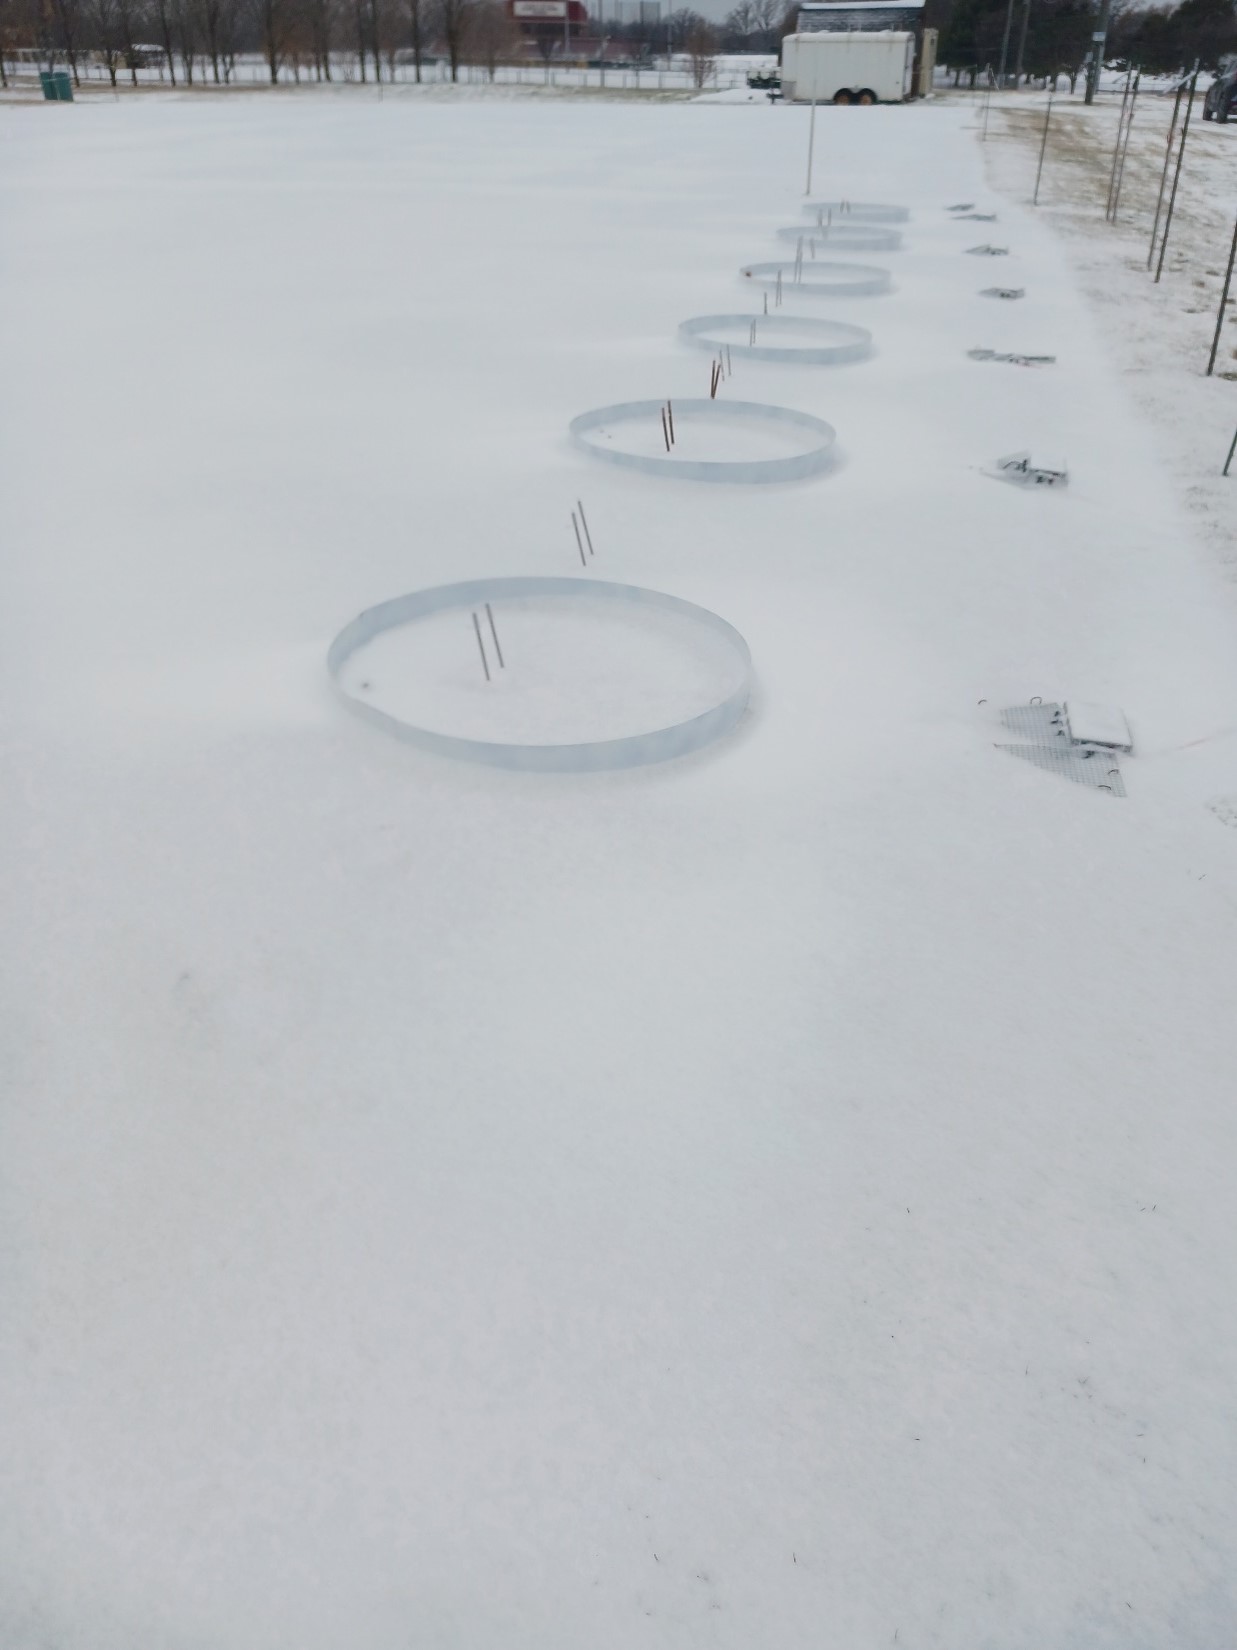 turfgrass research plots with plastic circular structures; snow is covering the landscapes